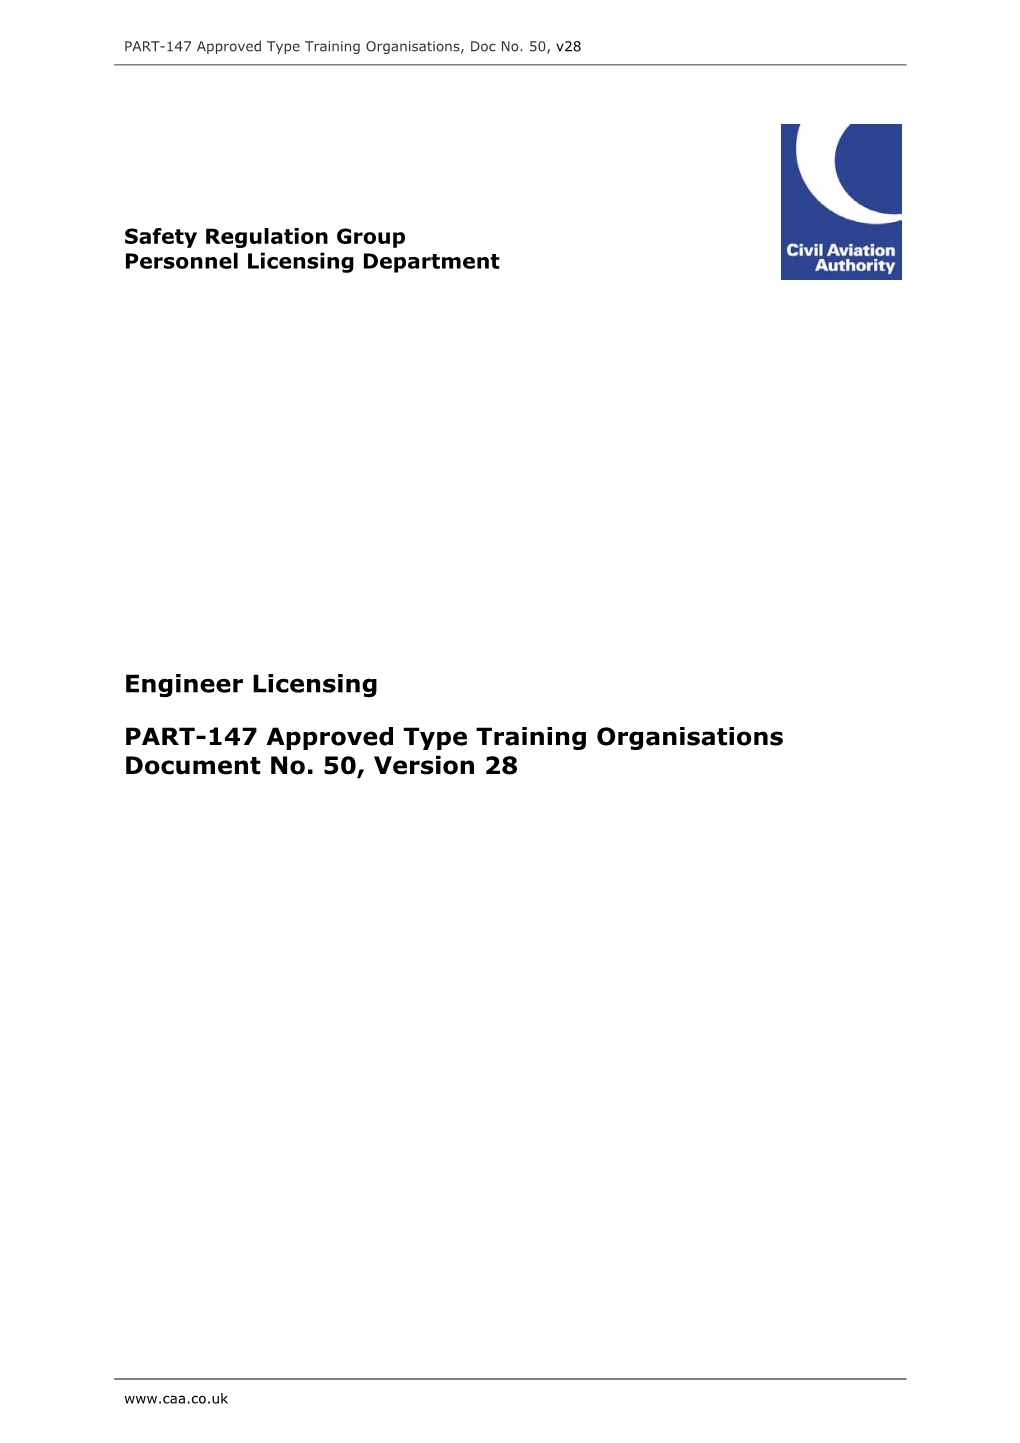 PART-147 Approved Type Training Organisations, Doc No